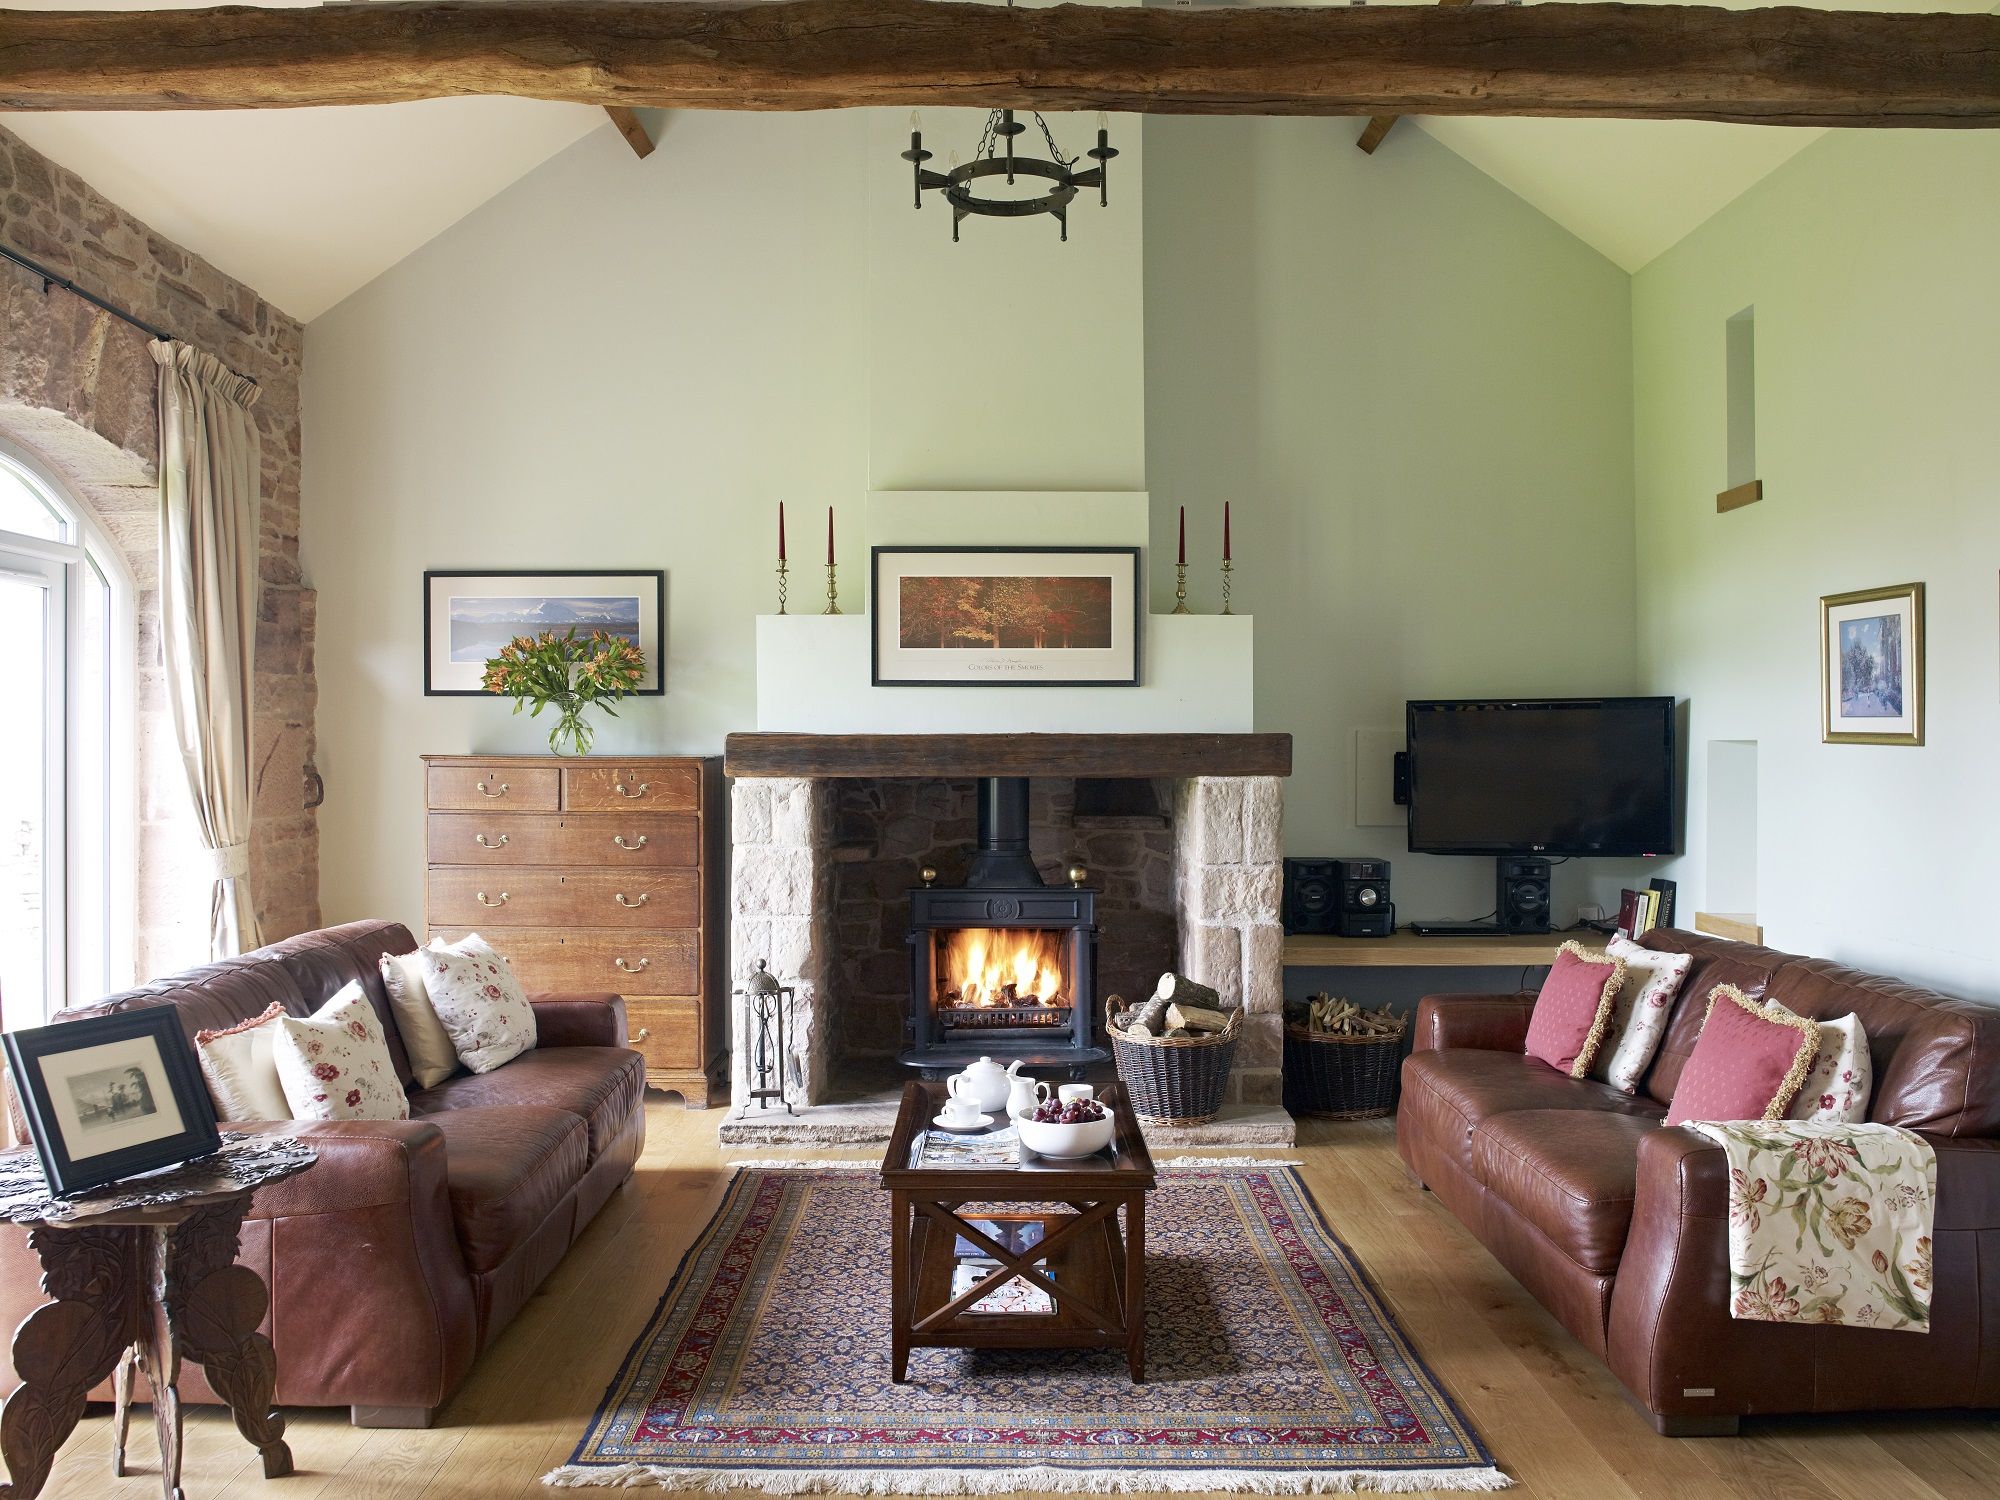 Riverain Coach House self catering holiday cottage with open fire logs provided for family holidays dogs welcome exclusive use private gardens and parking at The Rowley Estates